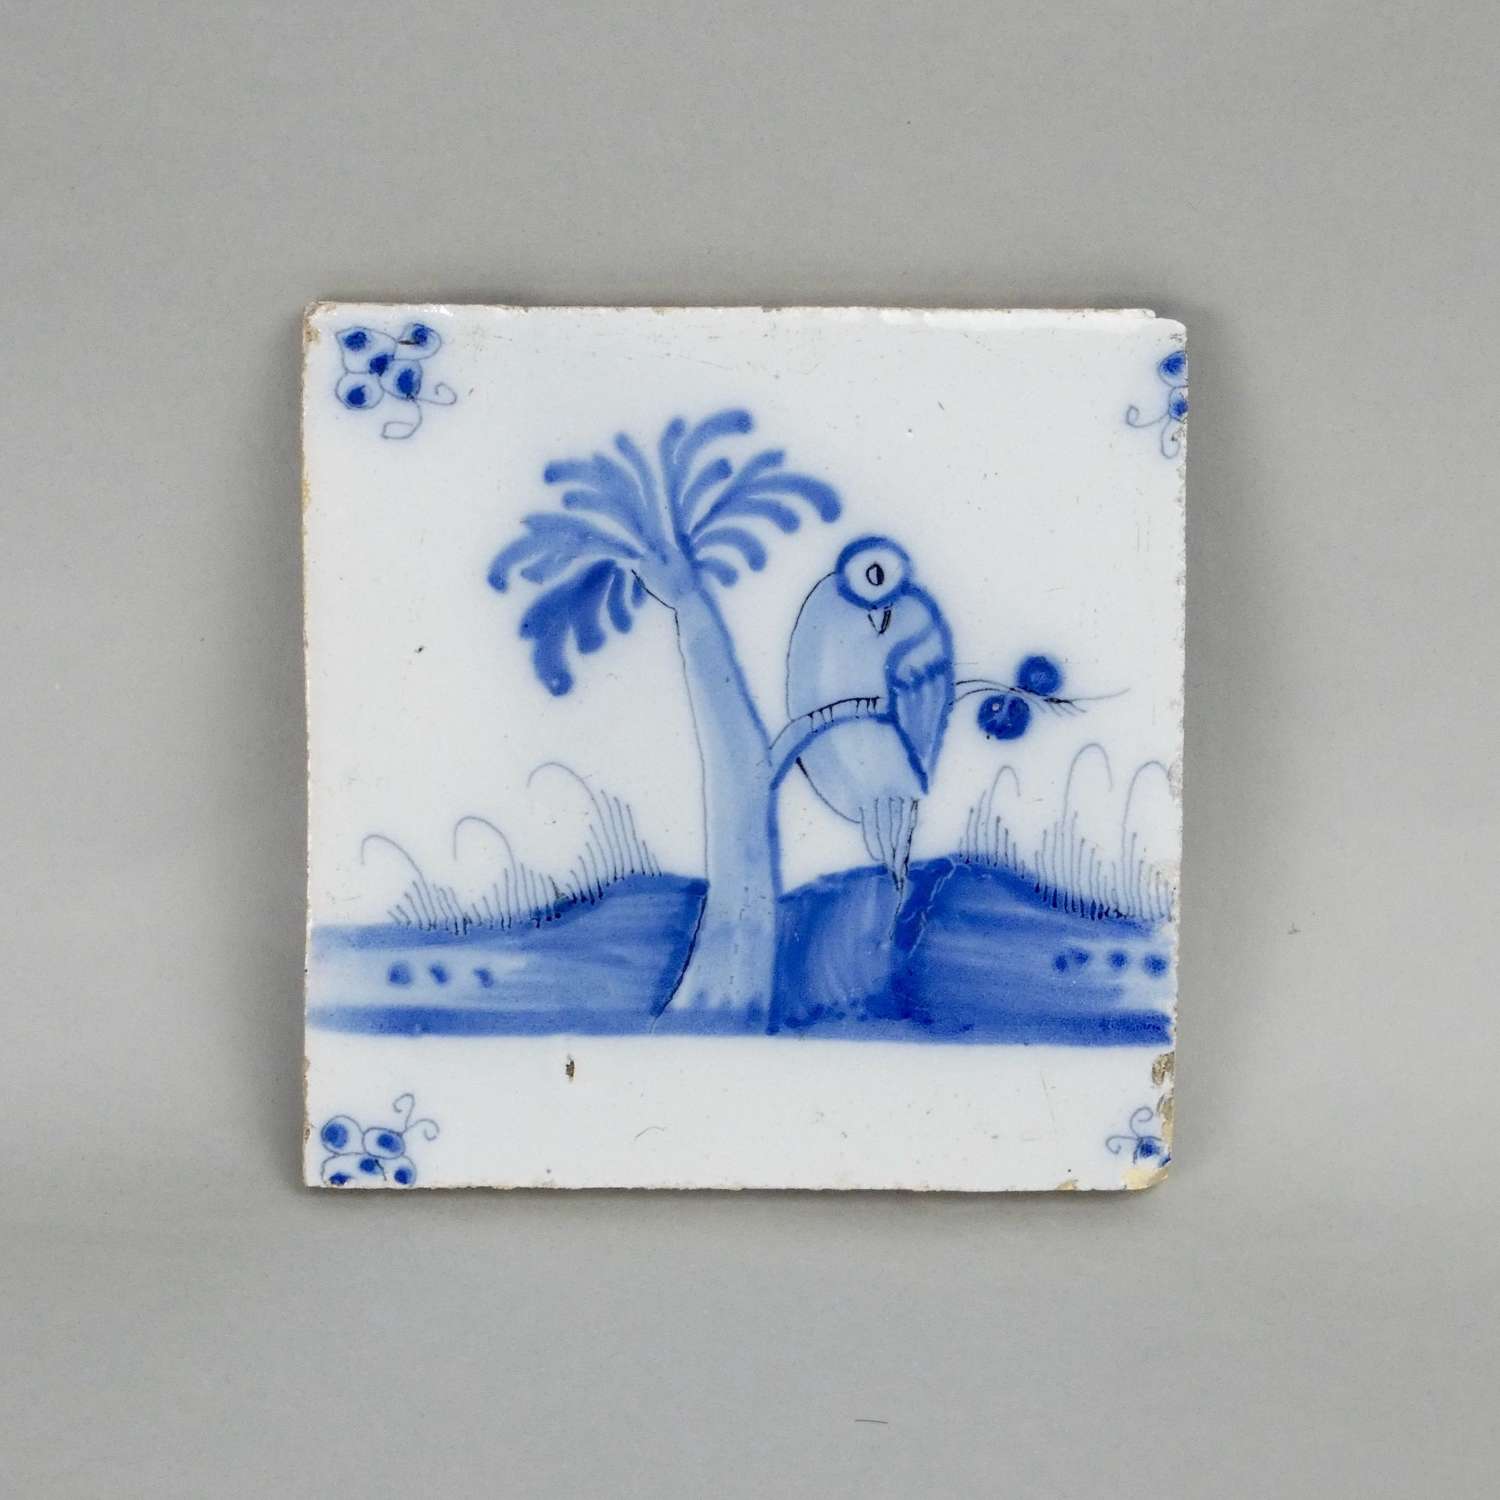 Delft tile painted with a bird